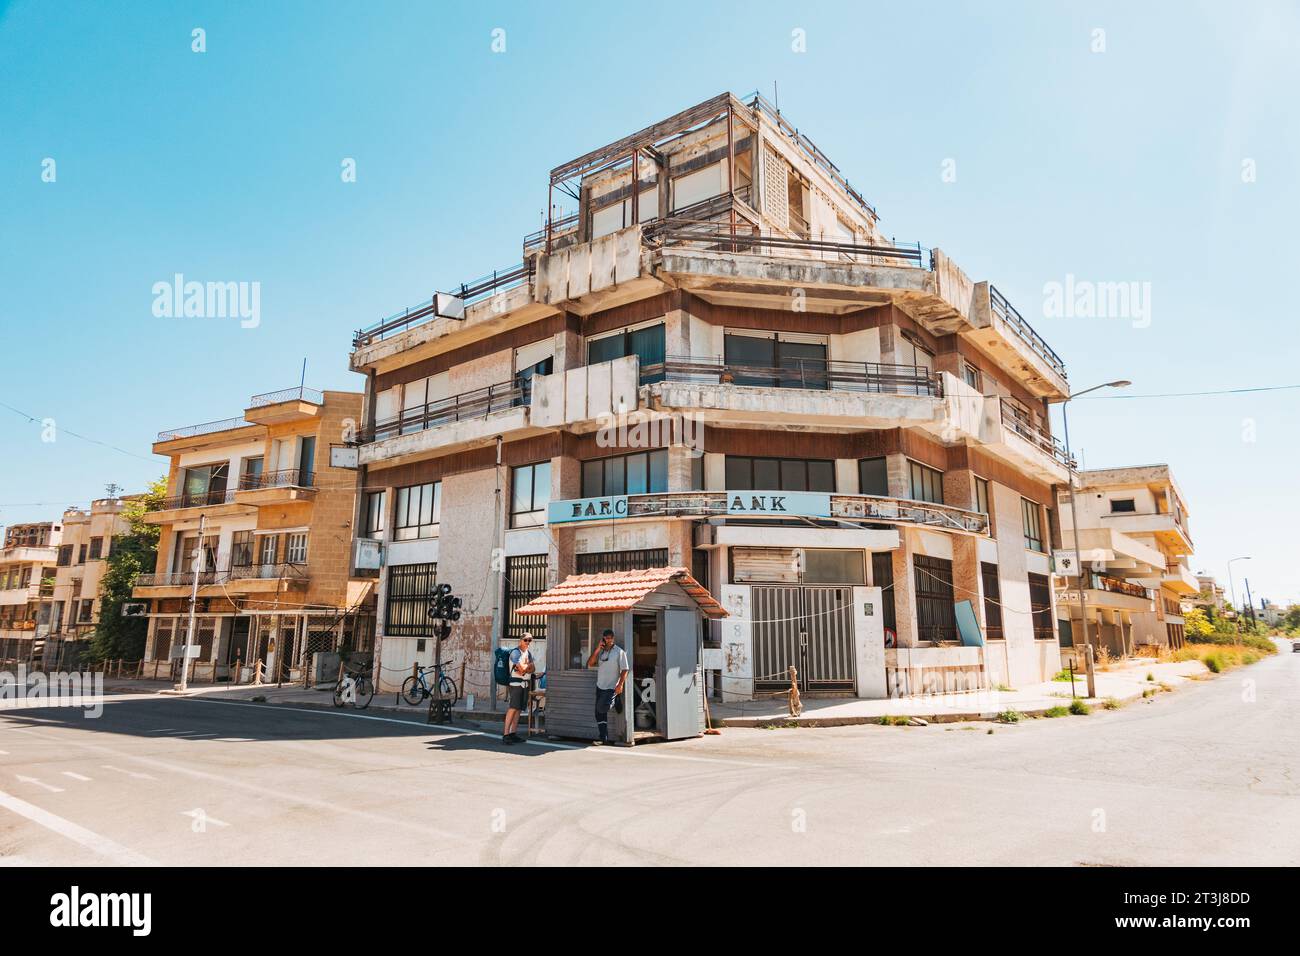 Abandoned seaside suburbs of Varosha in the city of Famagusta, Northern Cyprus. Locals fled a 1974 Turkish invasion, re-opened to tourism in 2020. Stock Photo